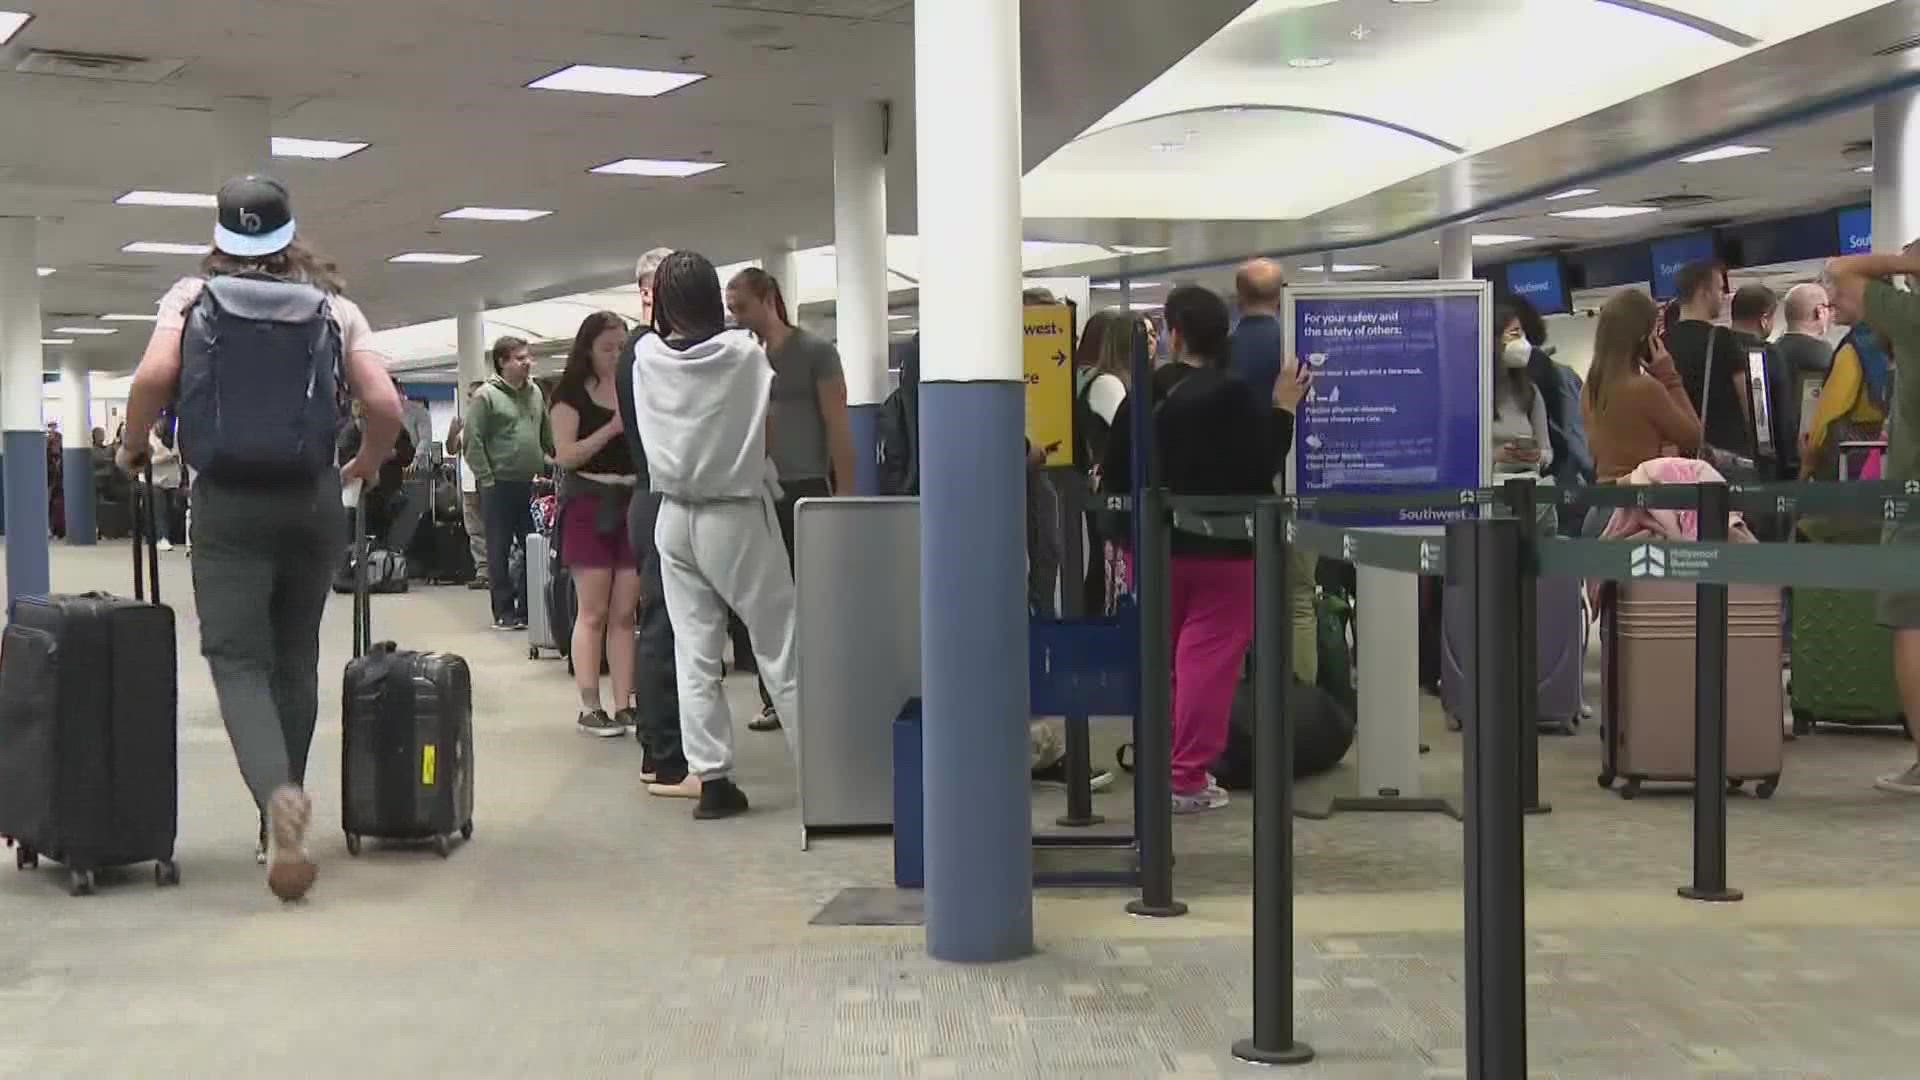 Flight Aware reported nearly 2700 Southwest flight cancelations and 1000 delayed flights.